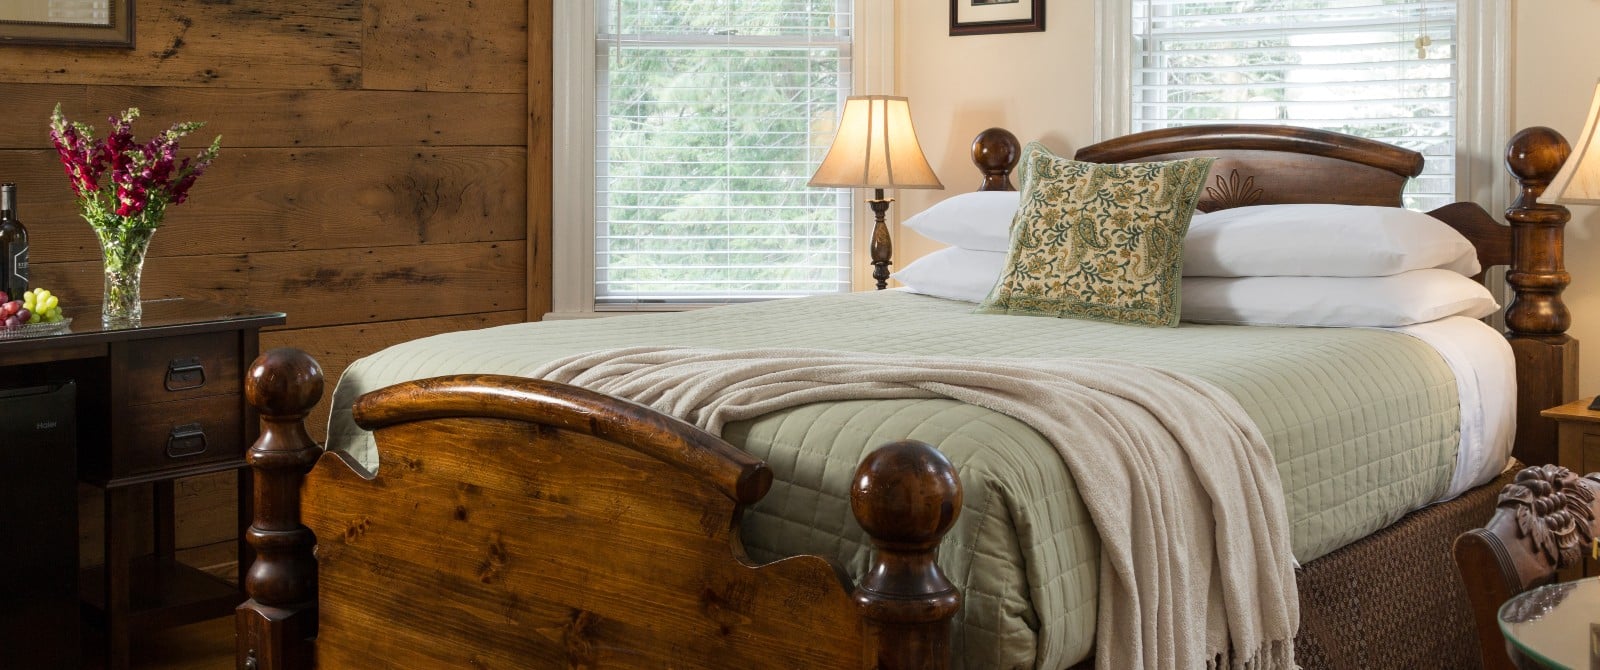 Queen Size Bed in the Chestnut Room